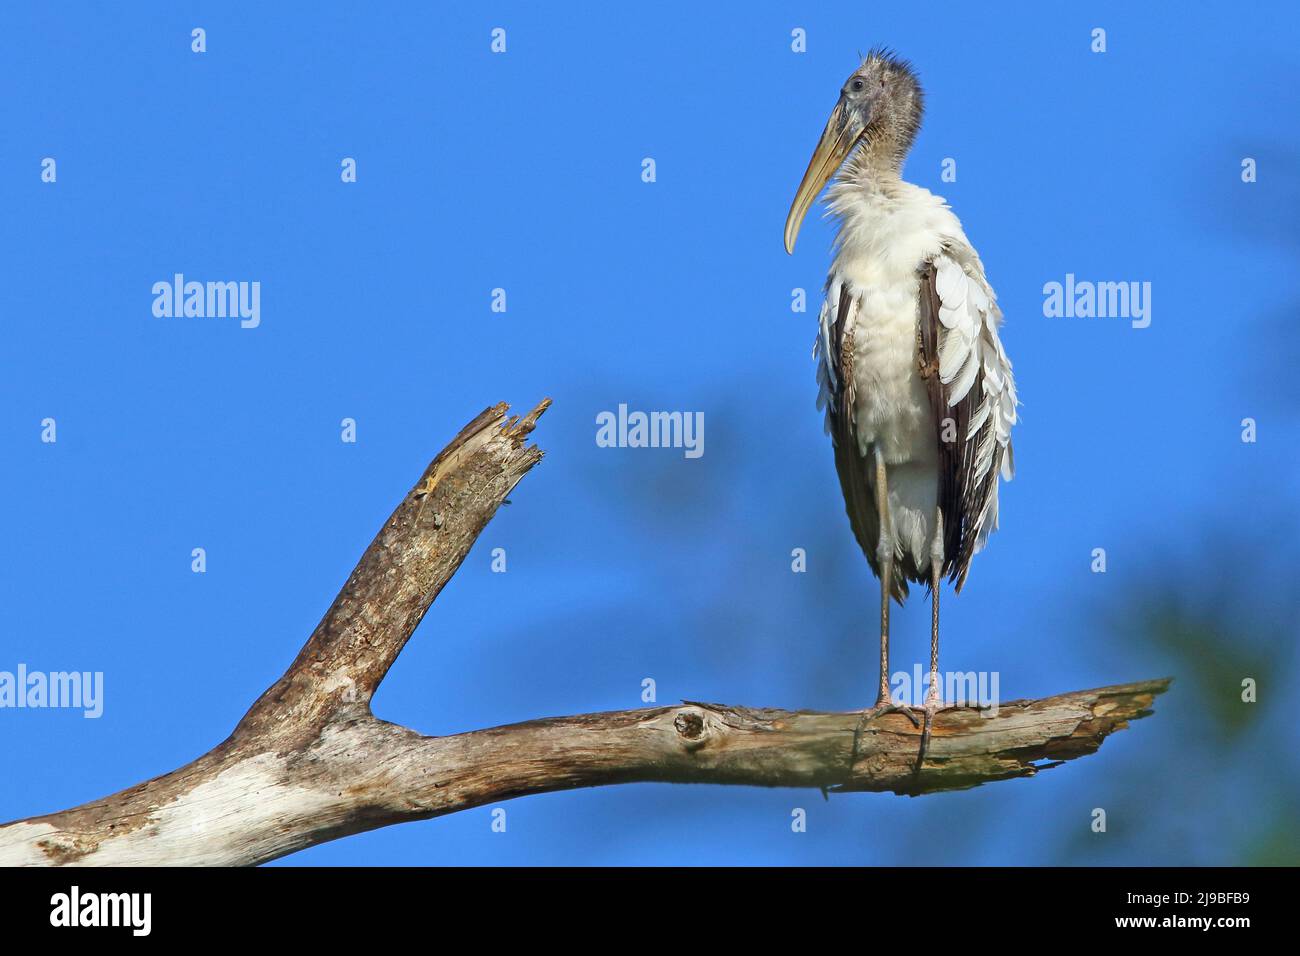 Wood stork perched on a branch at the top of a tree, with a blue sky background Stock Photo